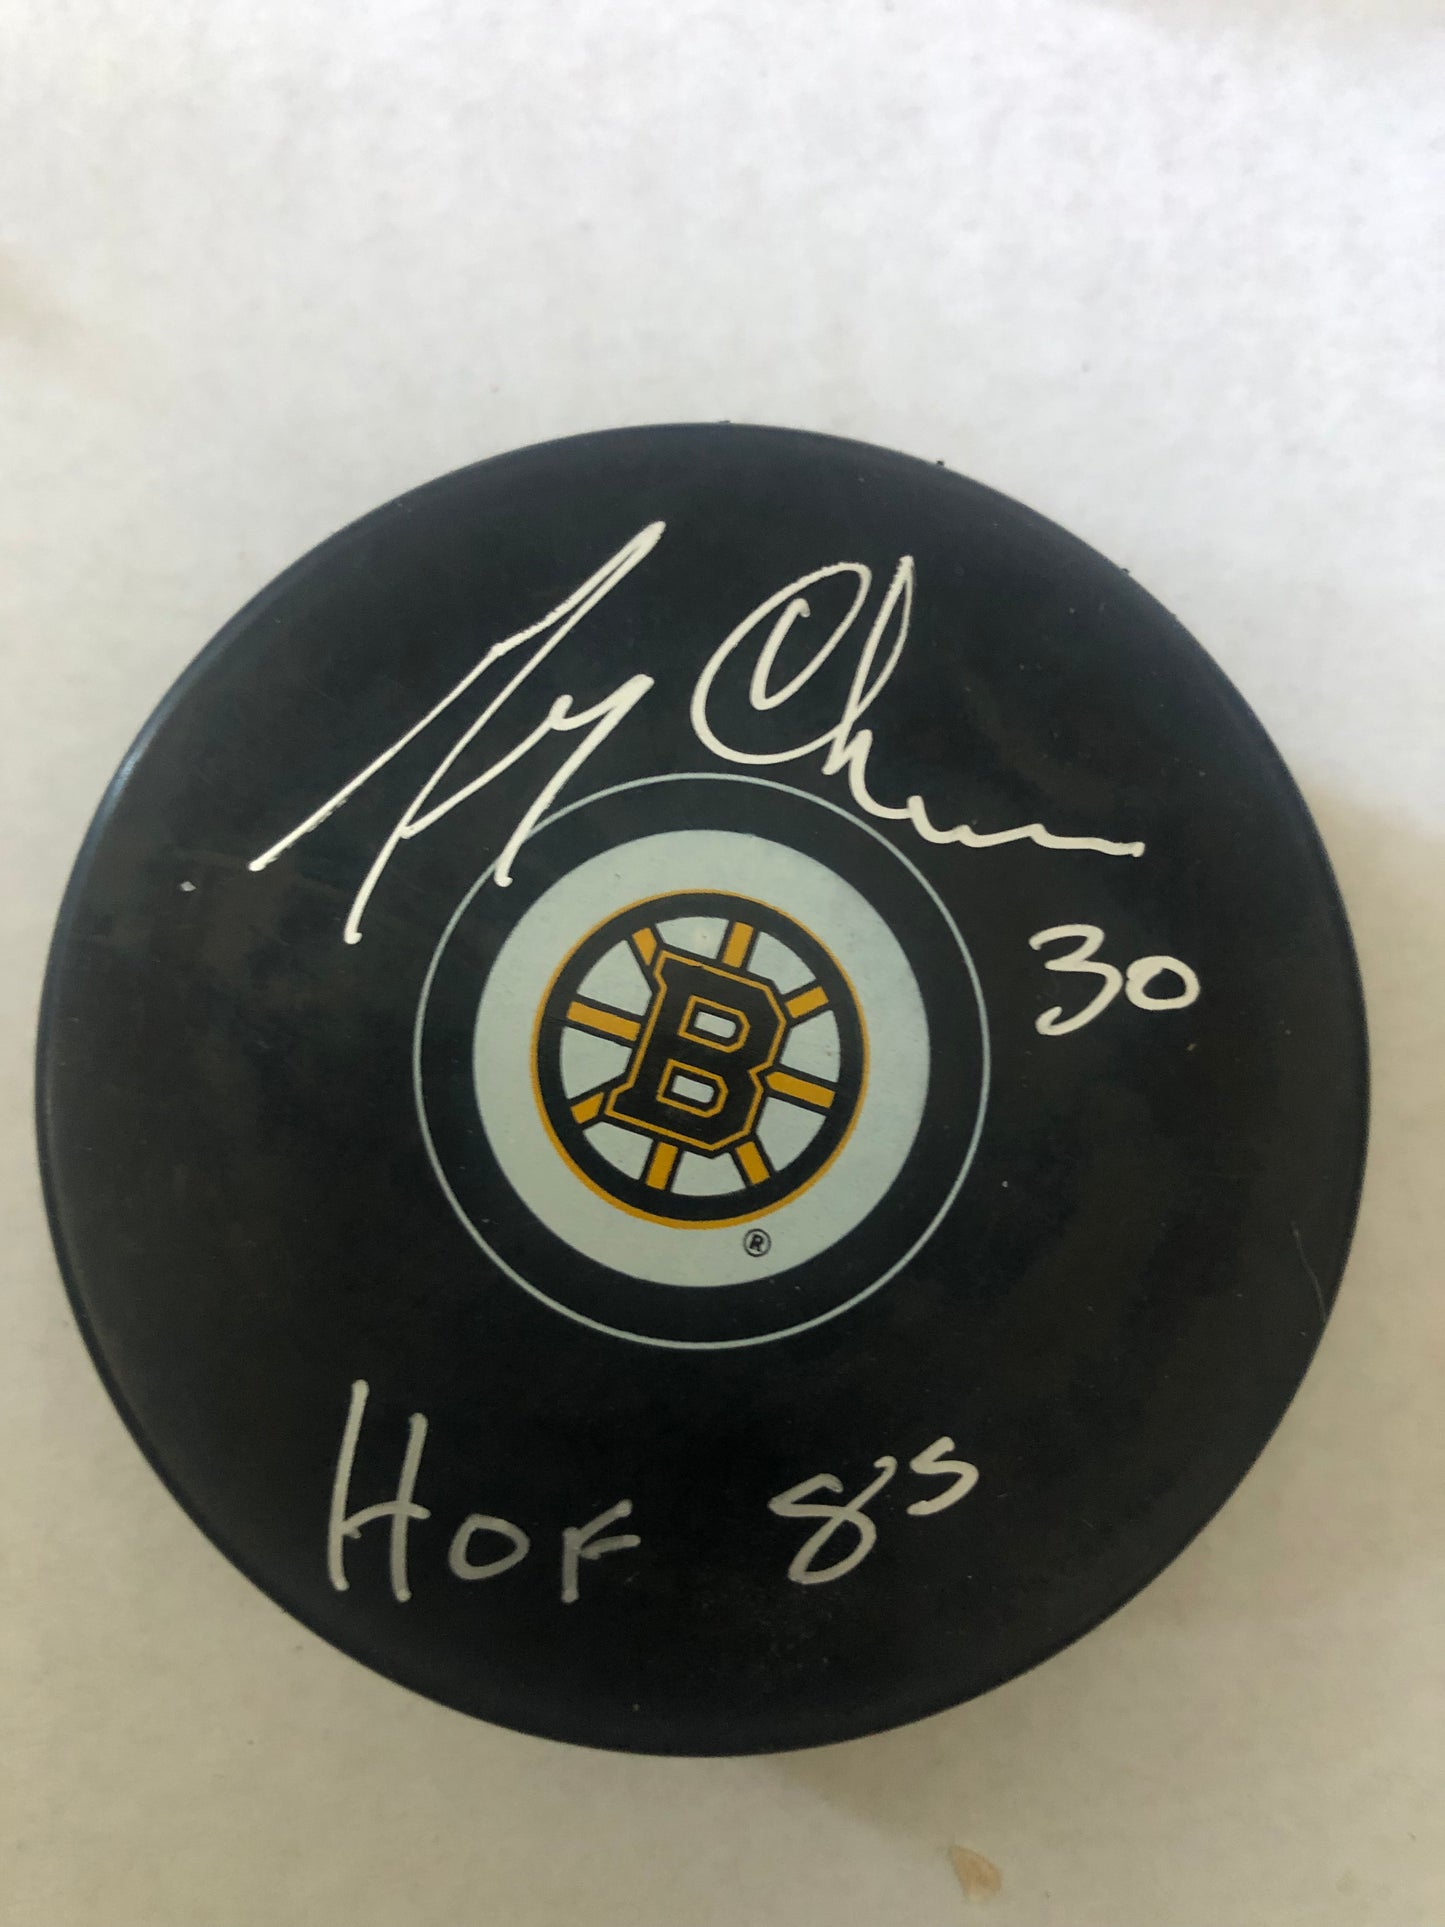 Bruins Gerry Cheevers signed puck w/HOF 85 inscription    Cheevers hologram